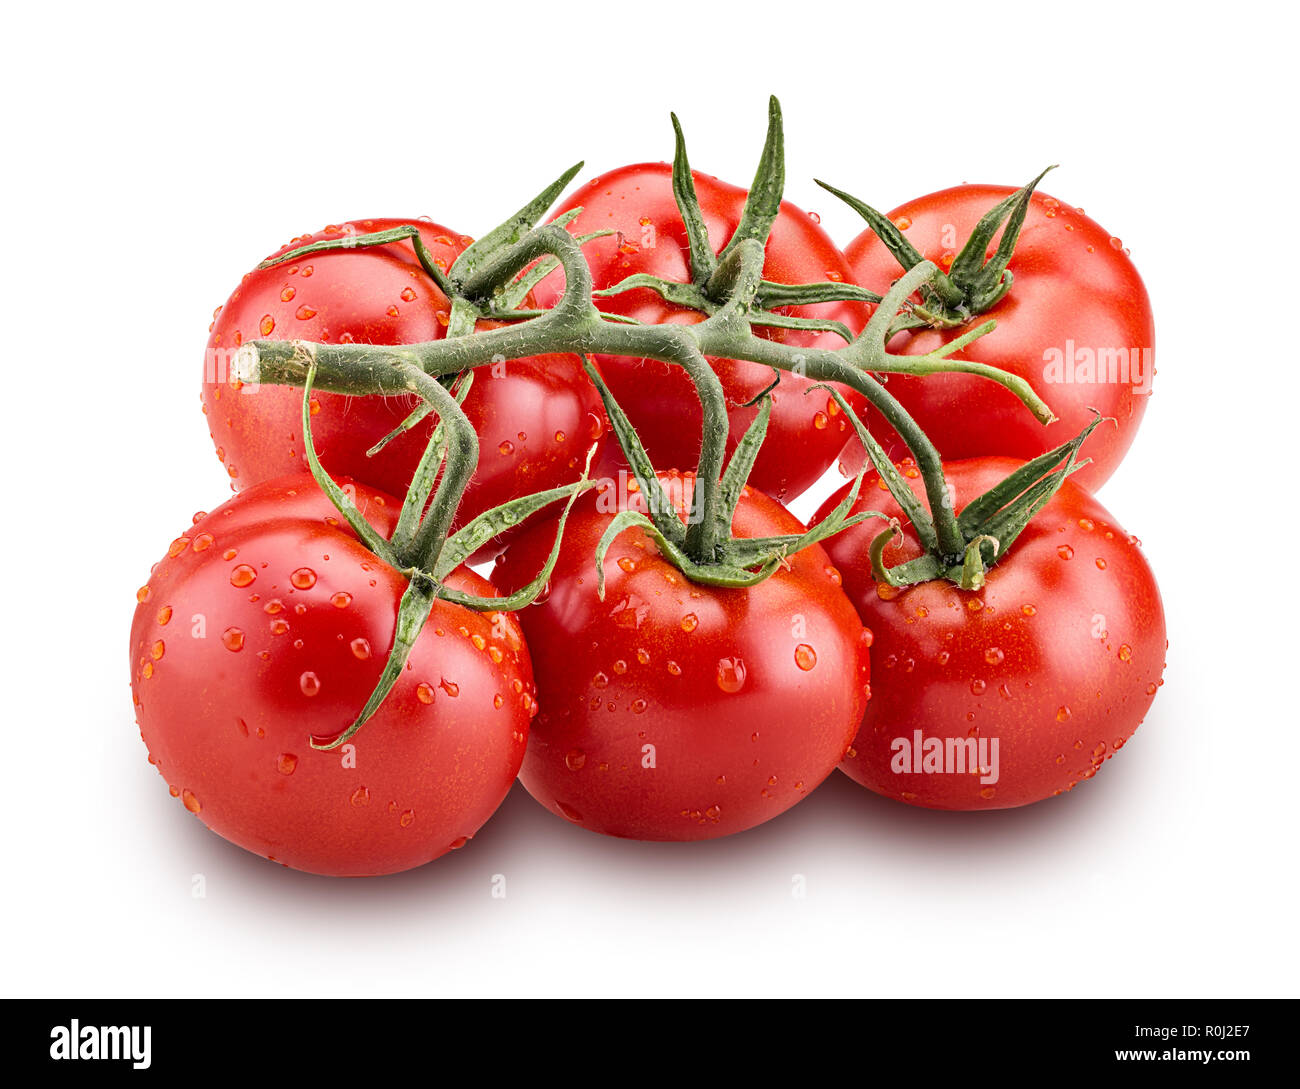 Big branch of fresh red tomato with green leaves with water drops isolated on white background Clipping Path Stock Photo